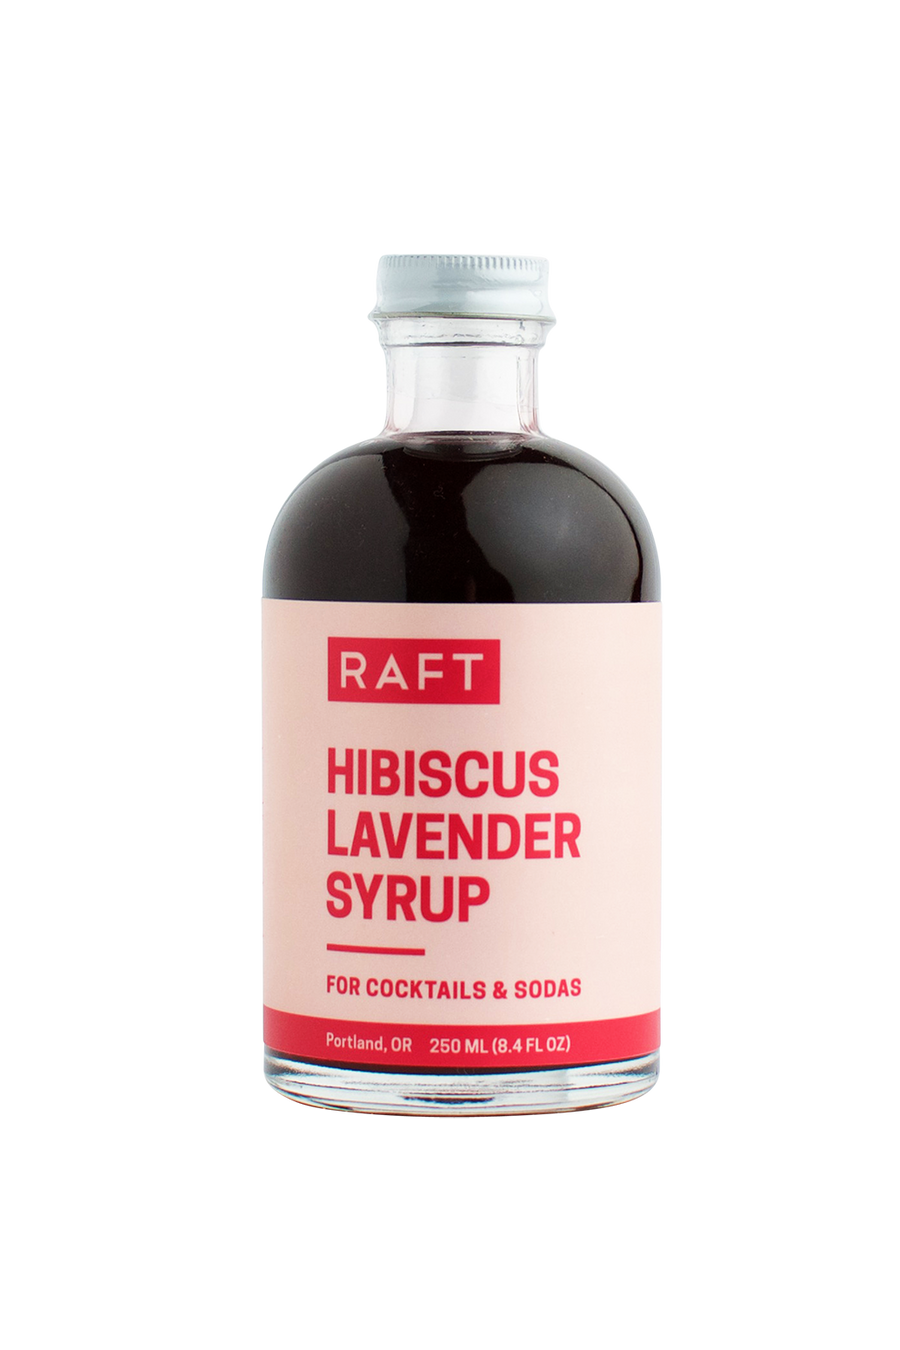 Hibiscus Lavender Syrup